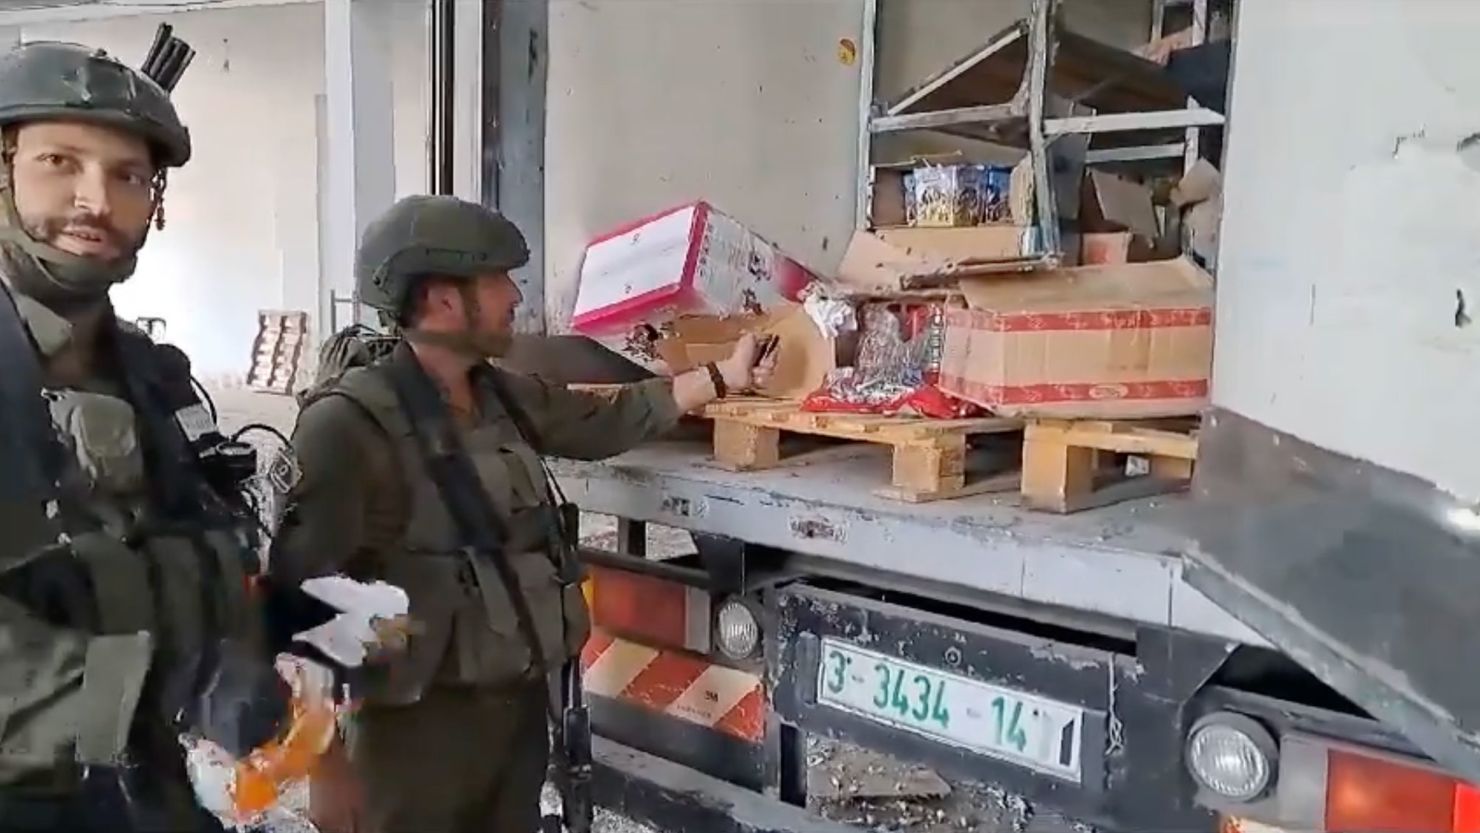 A video posted online shows Israeli soldiers burning food in Gaza.